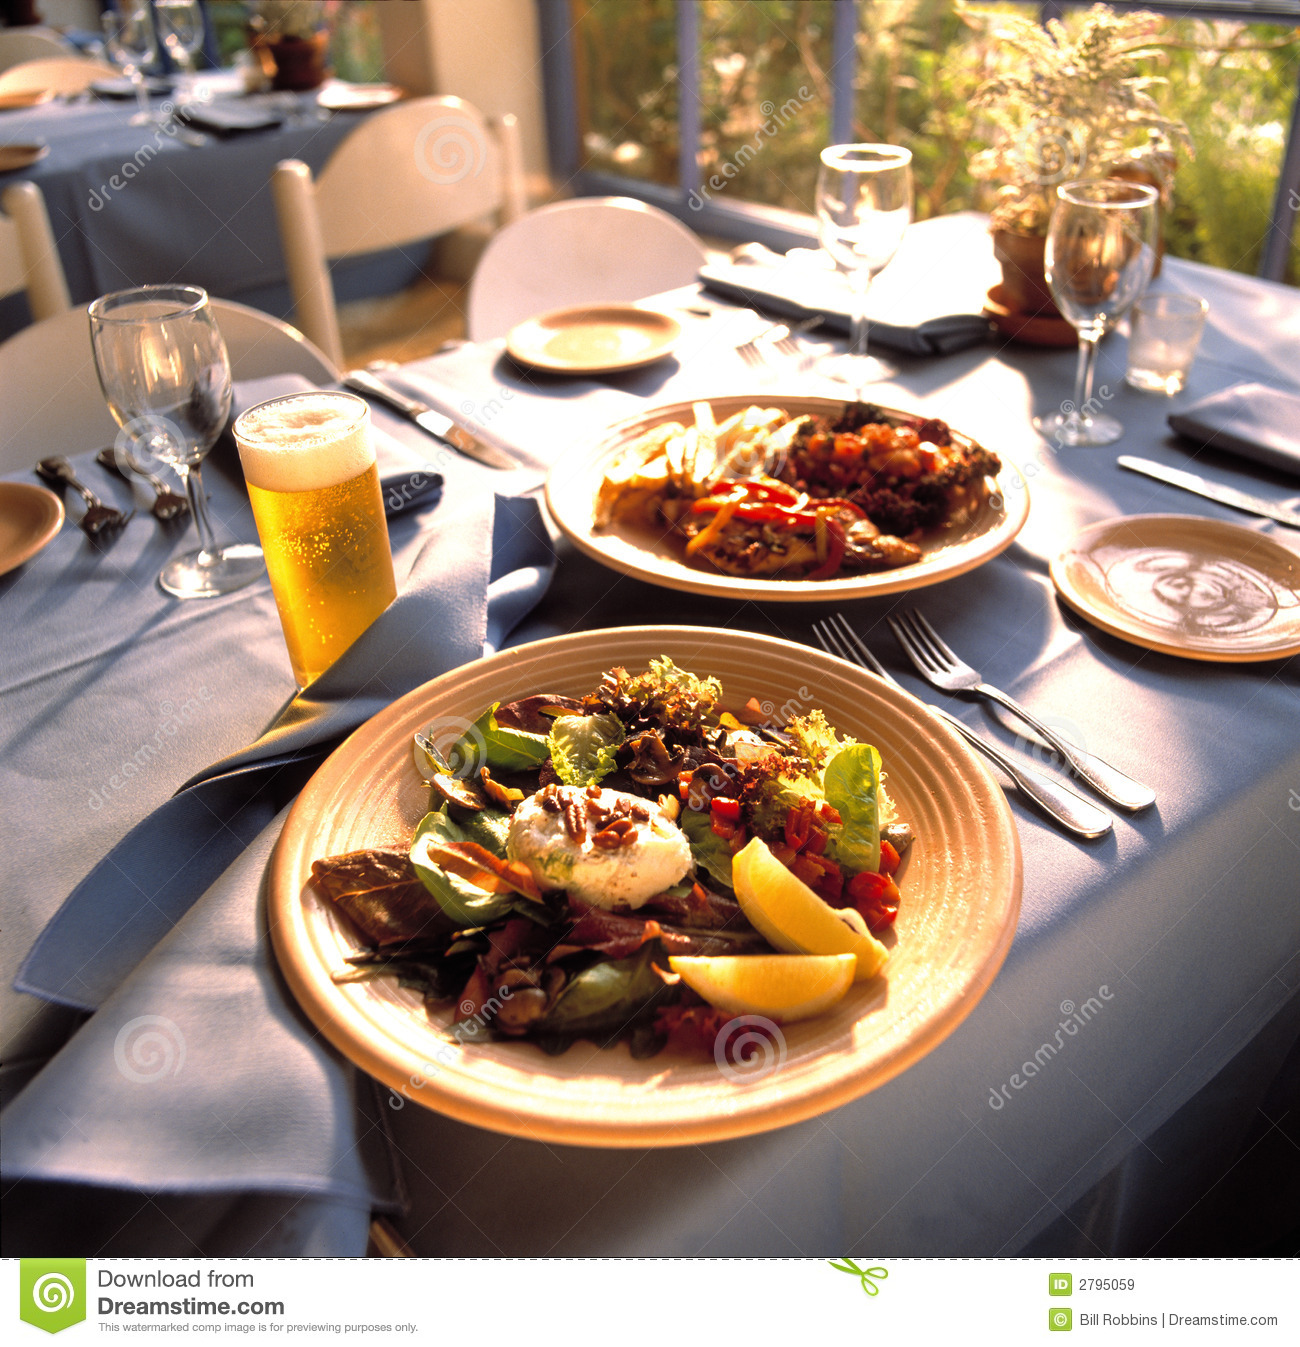 Resturant Table Setting Royalty Free Stock Images   Image  2795059